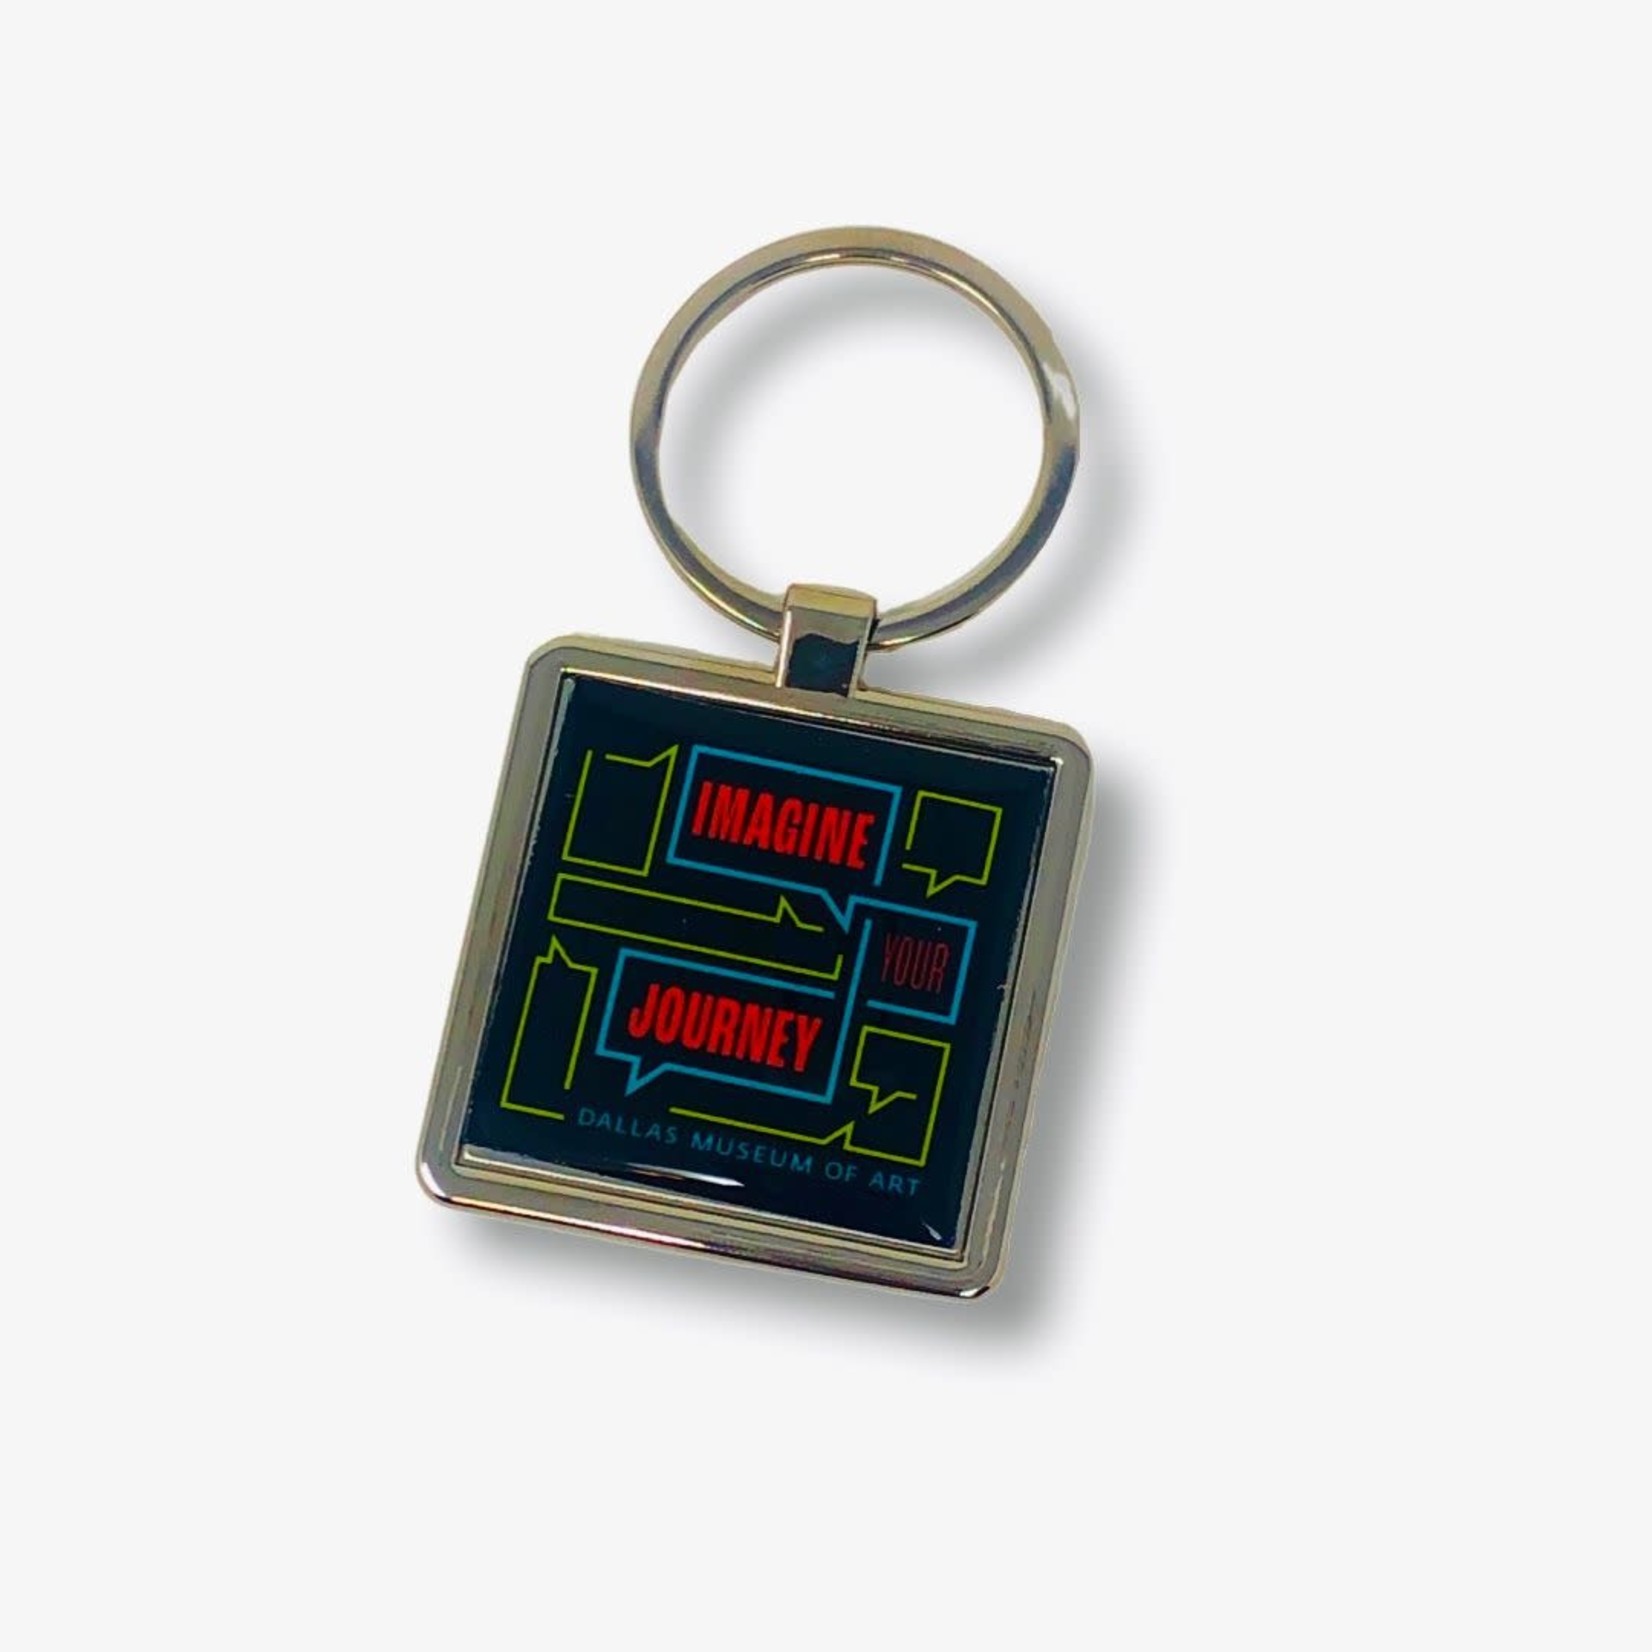 MUSEUM STORE PRODUCTS IMAGINE YOUR JOURNEY KEYCHAIN